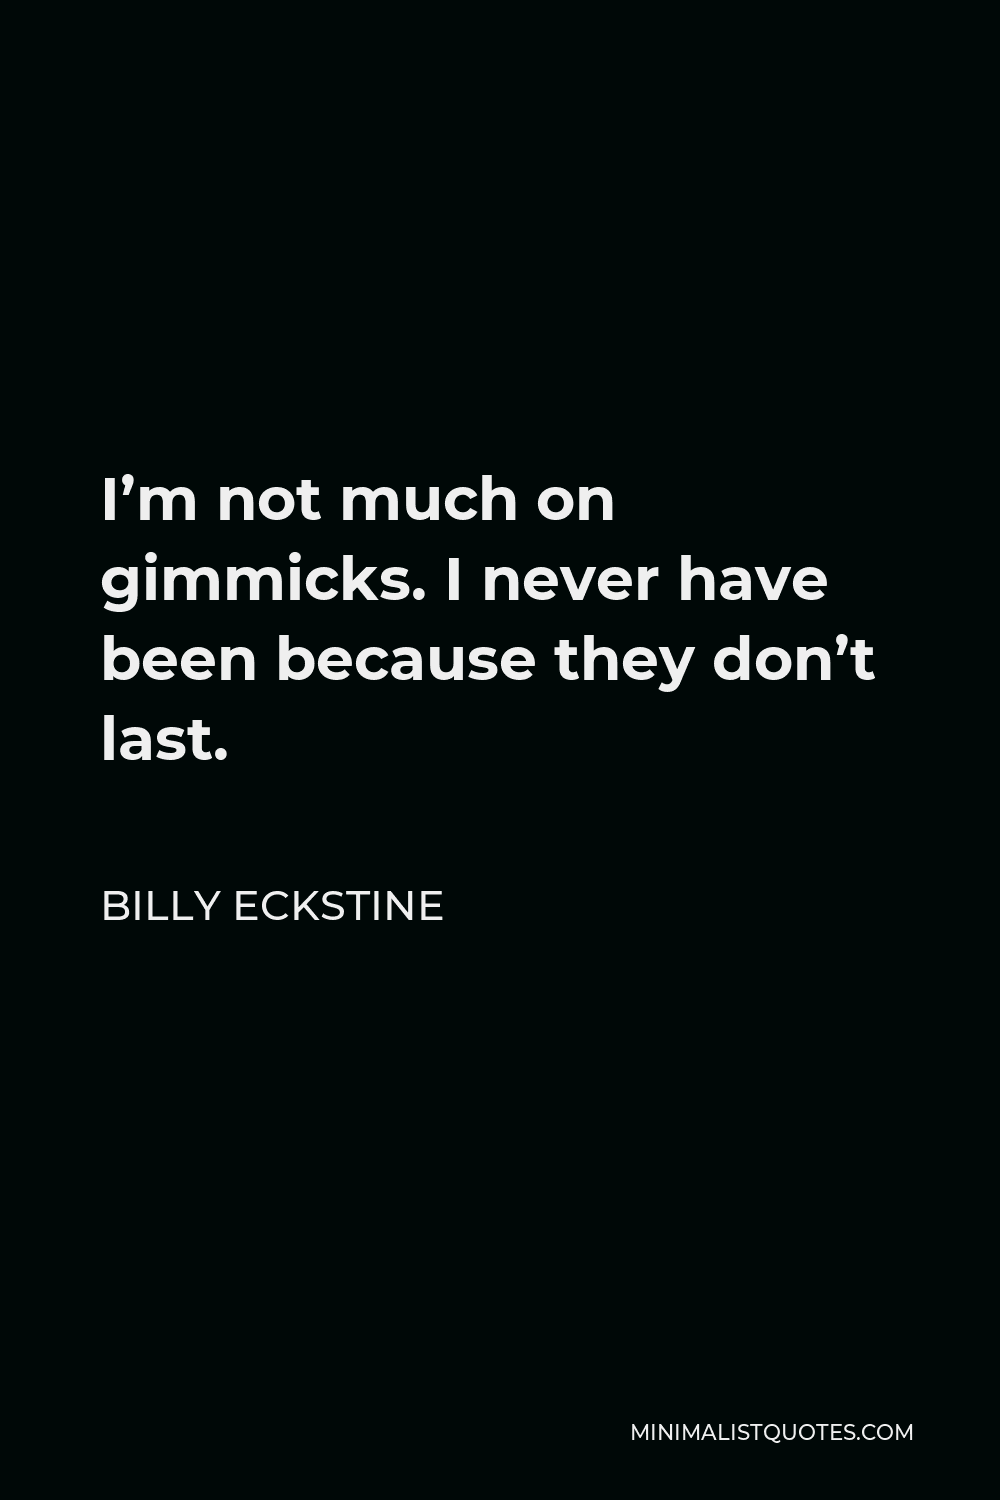 Billy Eckstine Quote - I’m not much on gimmicks. I never have been because they don’t last.